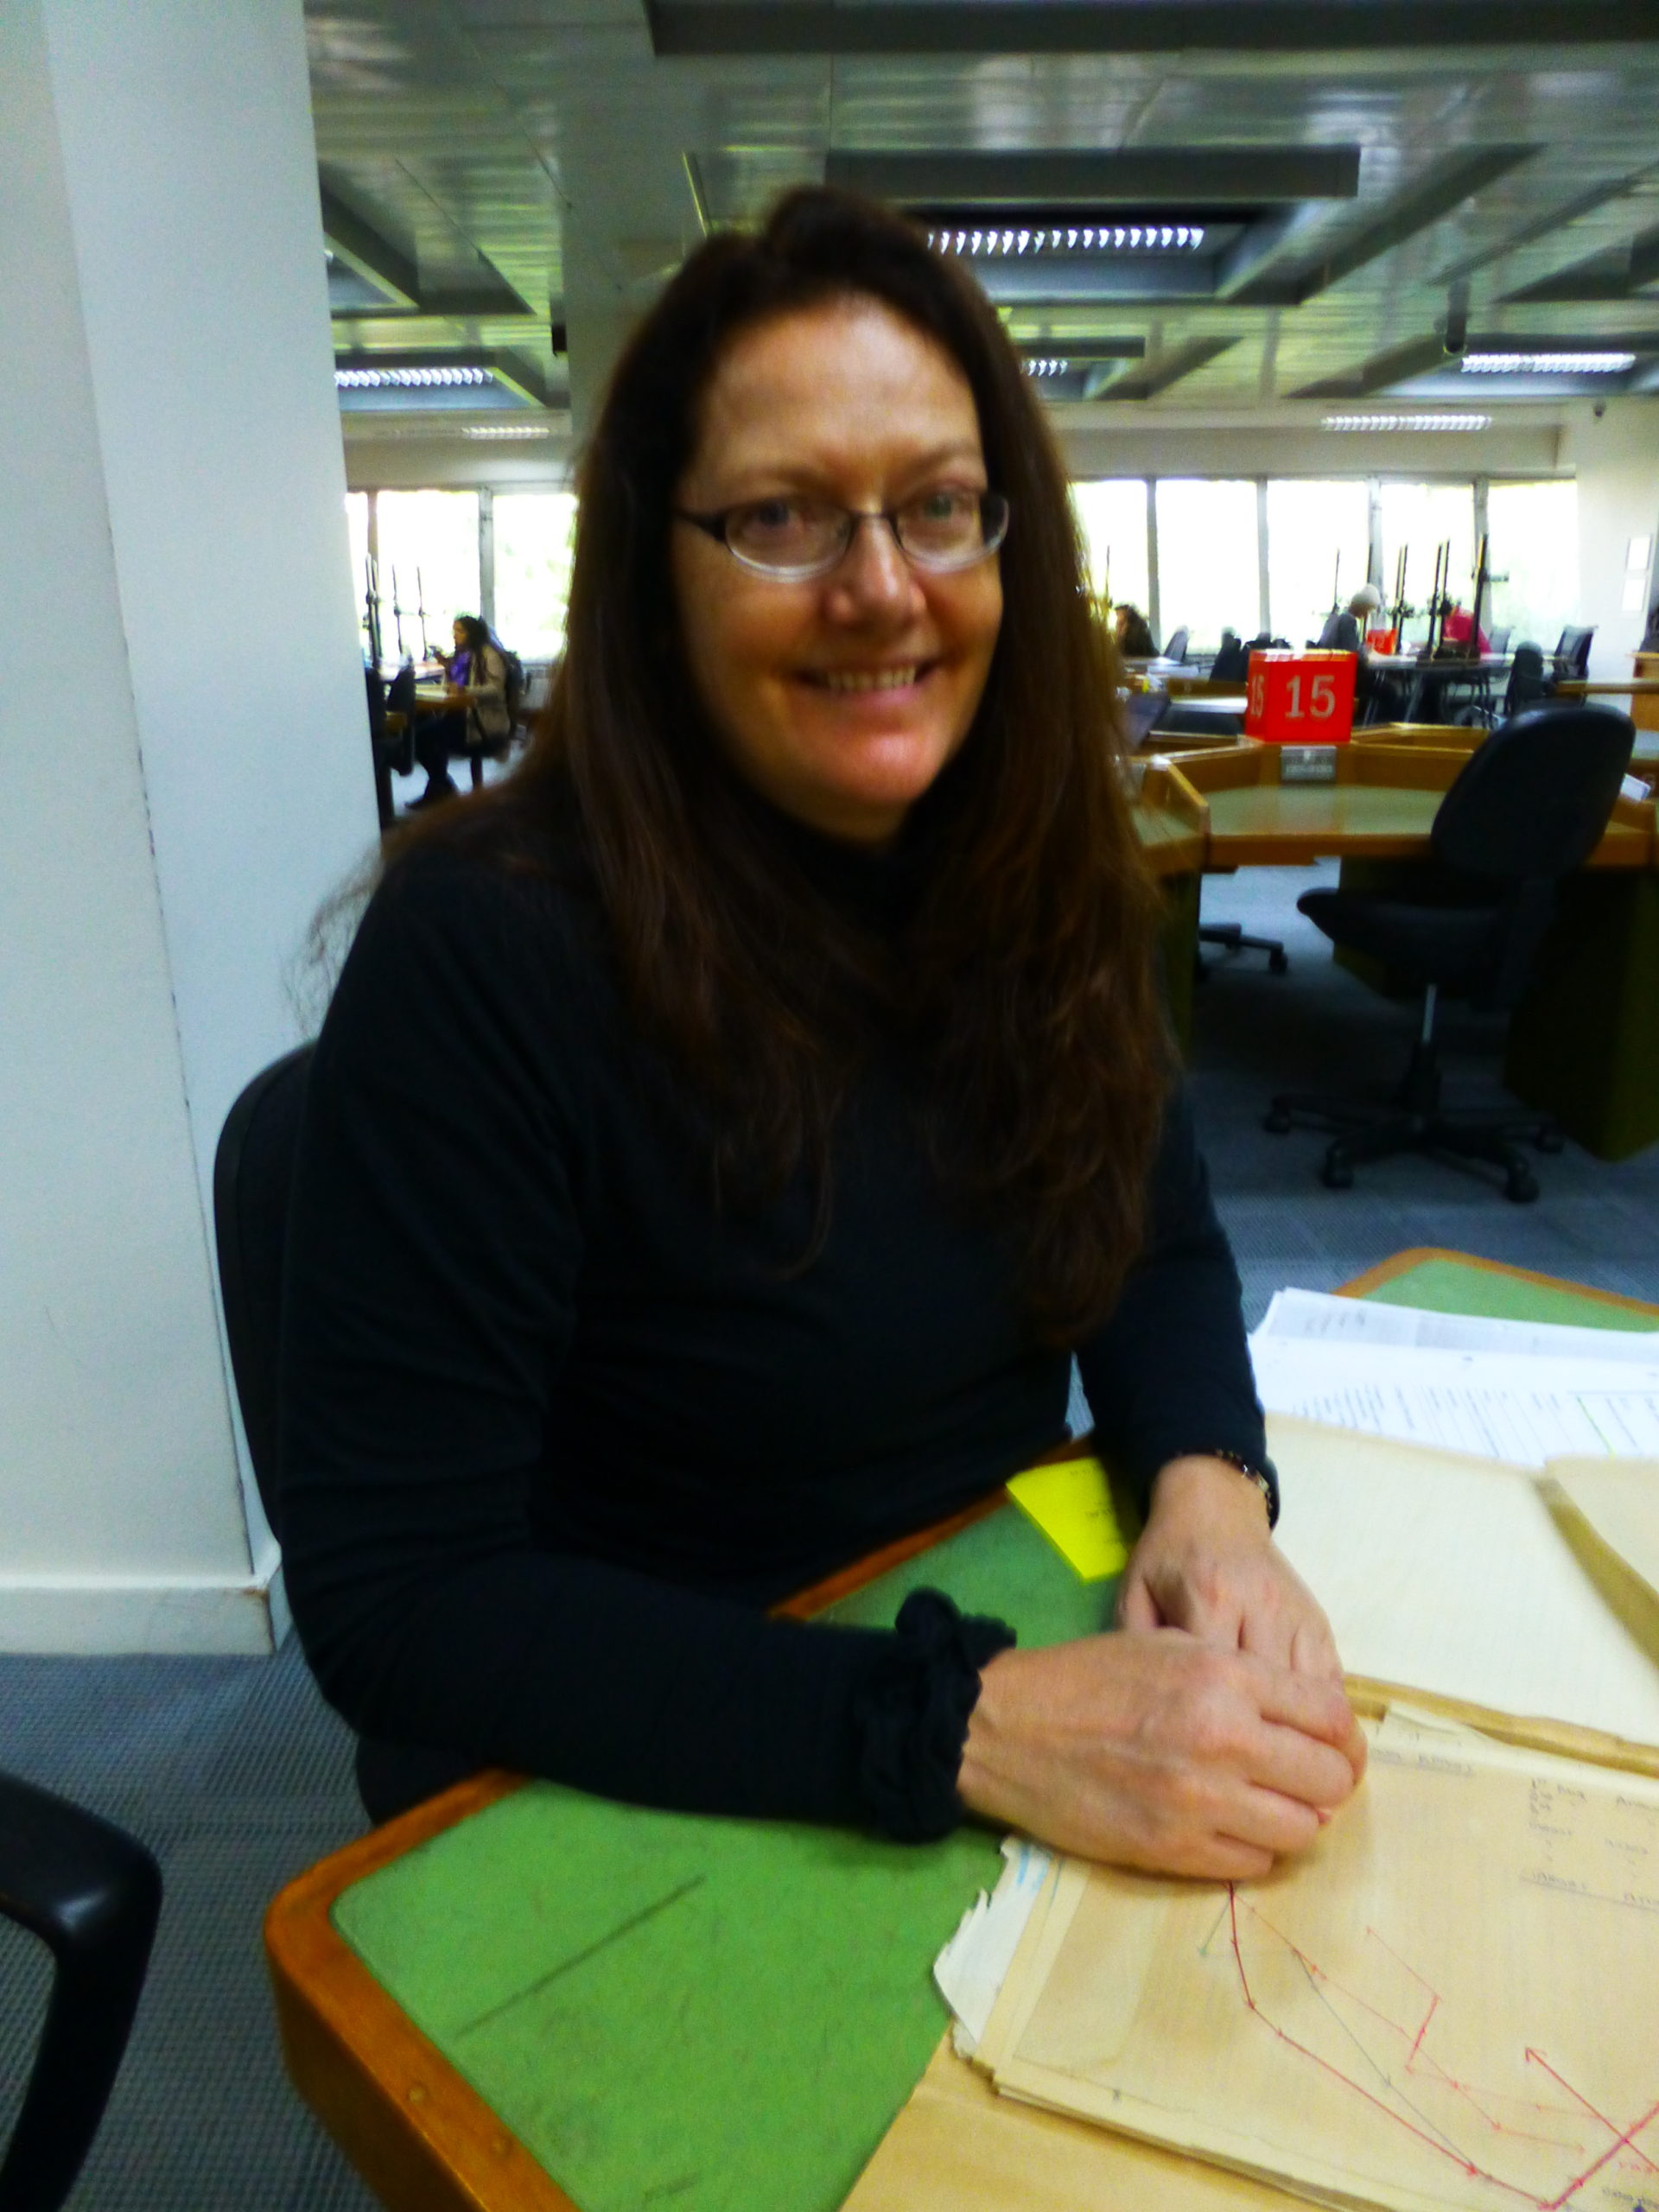 Heather Steele researching RAF South African Hurricane IIDs in the British National Archives in Kew, London